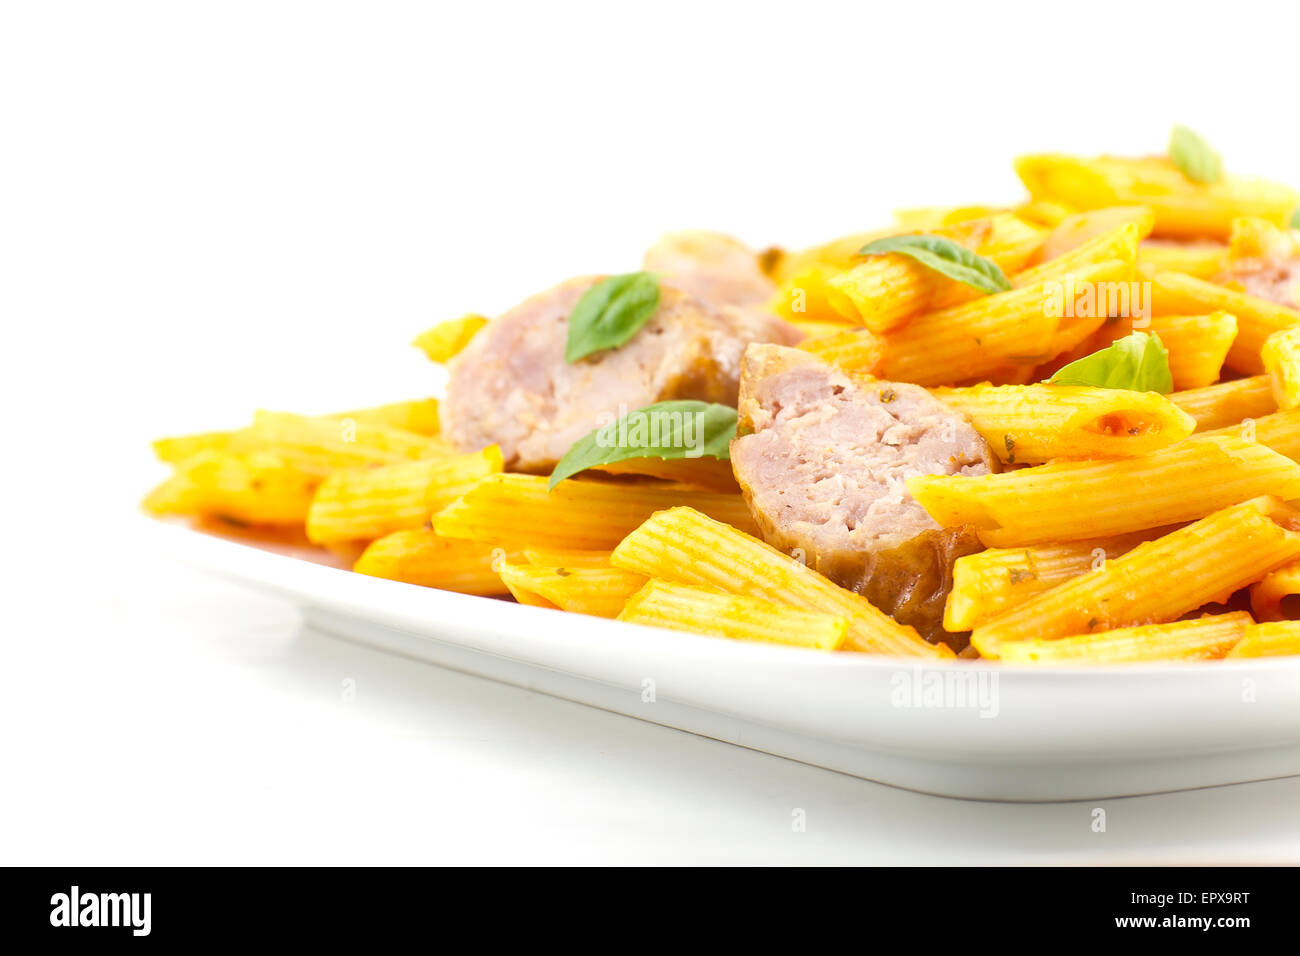 Sliced sausage with penne pasta and red tomato sauce with basil leaves Stock Photo